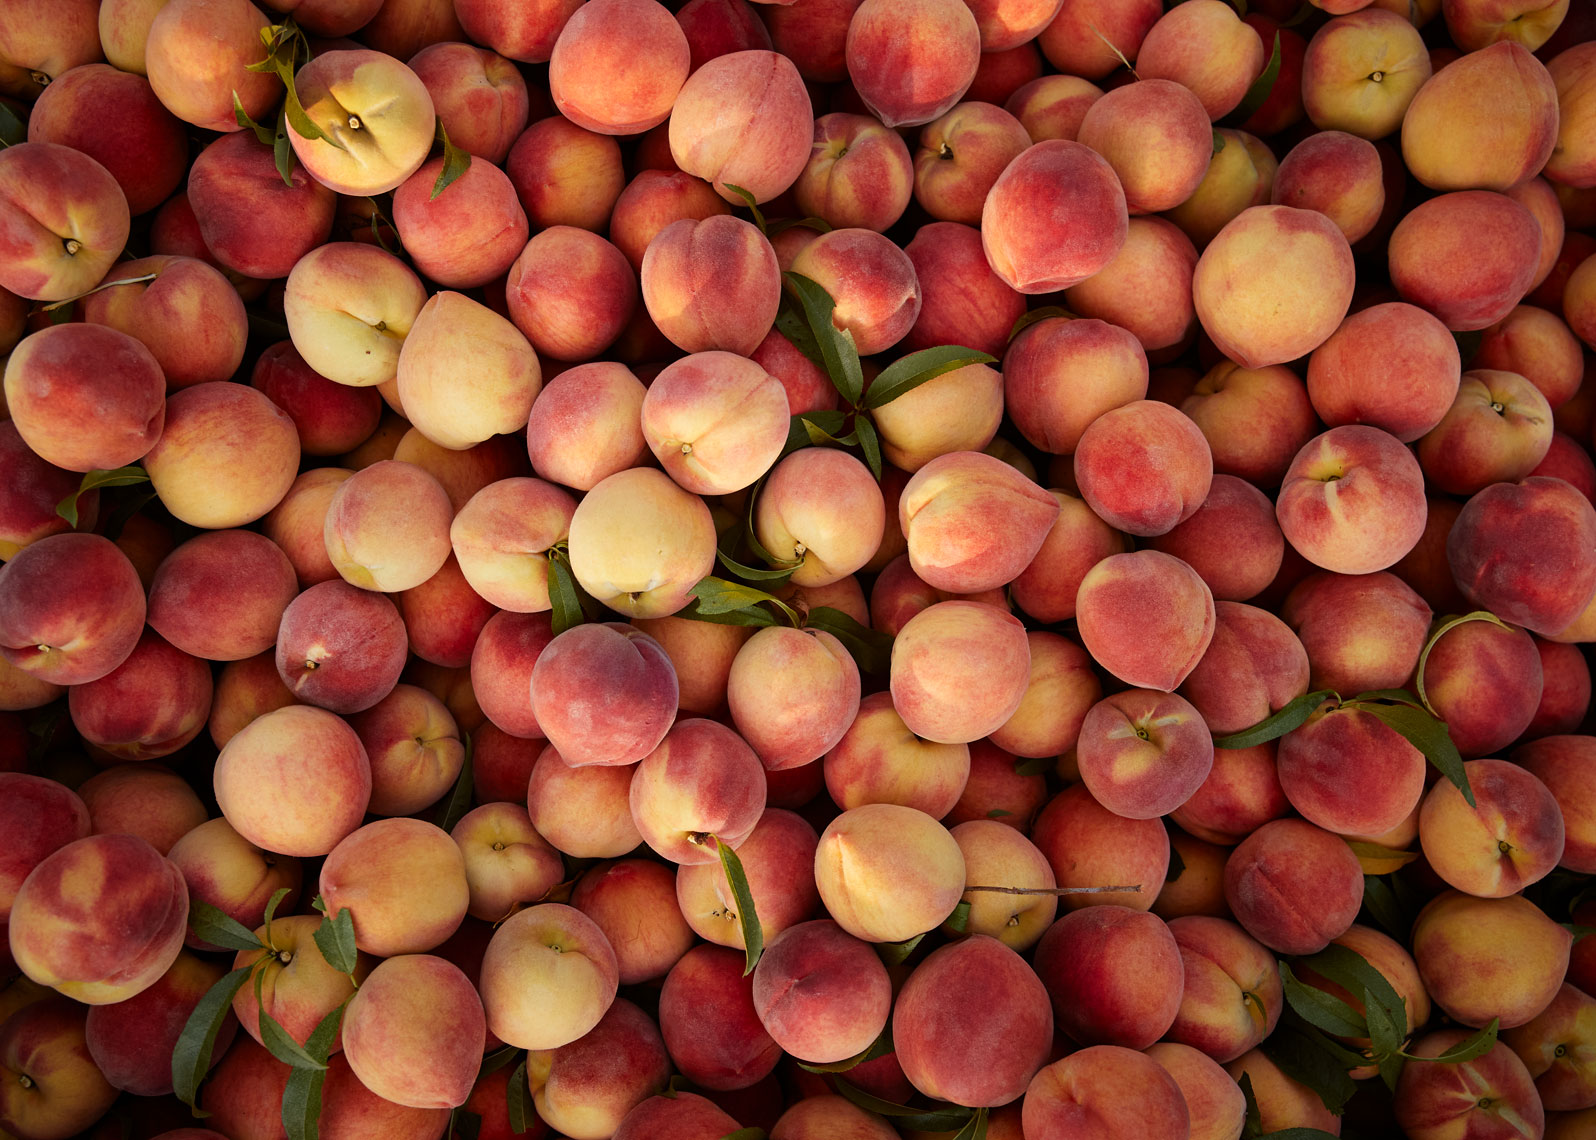 02-PEACHES-GG-Orchard-01133